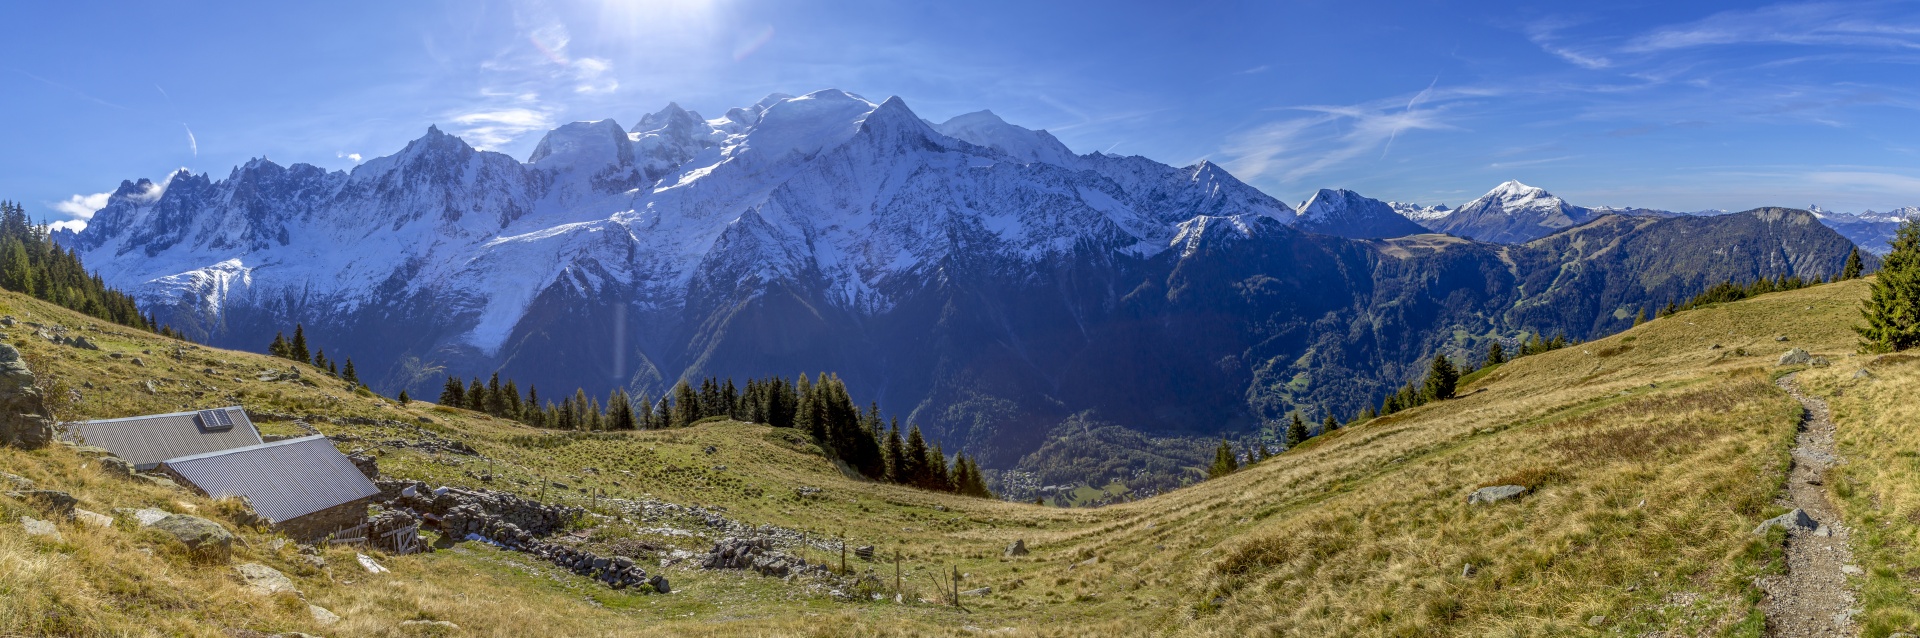 Aiguillette des Houches. Aiguillette des Houches is a magnificent stroll in the heart of the Mont-Blanc Massif that takes part of the Tour du Mont Blanc. With its sumptuous views of the Mont Blanc Massif